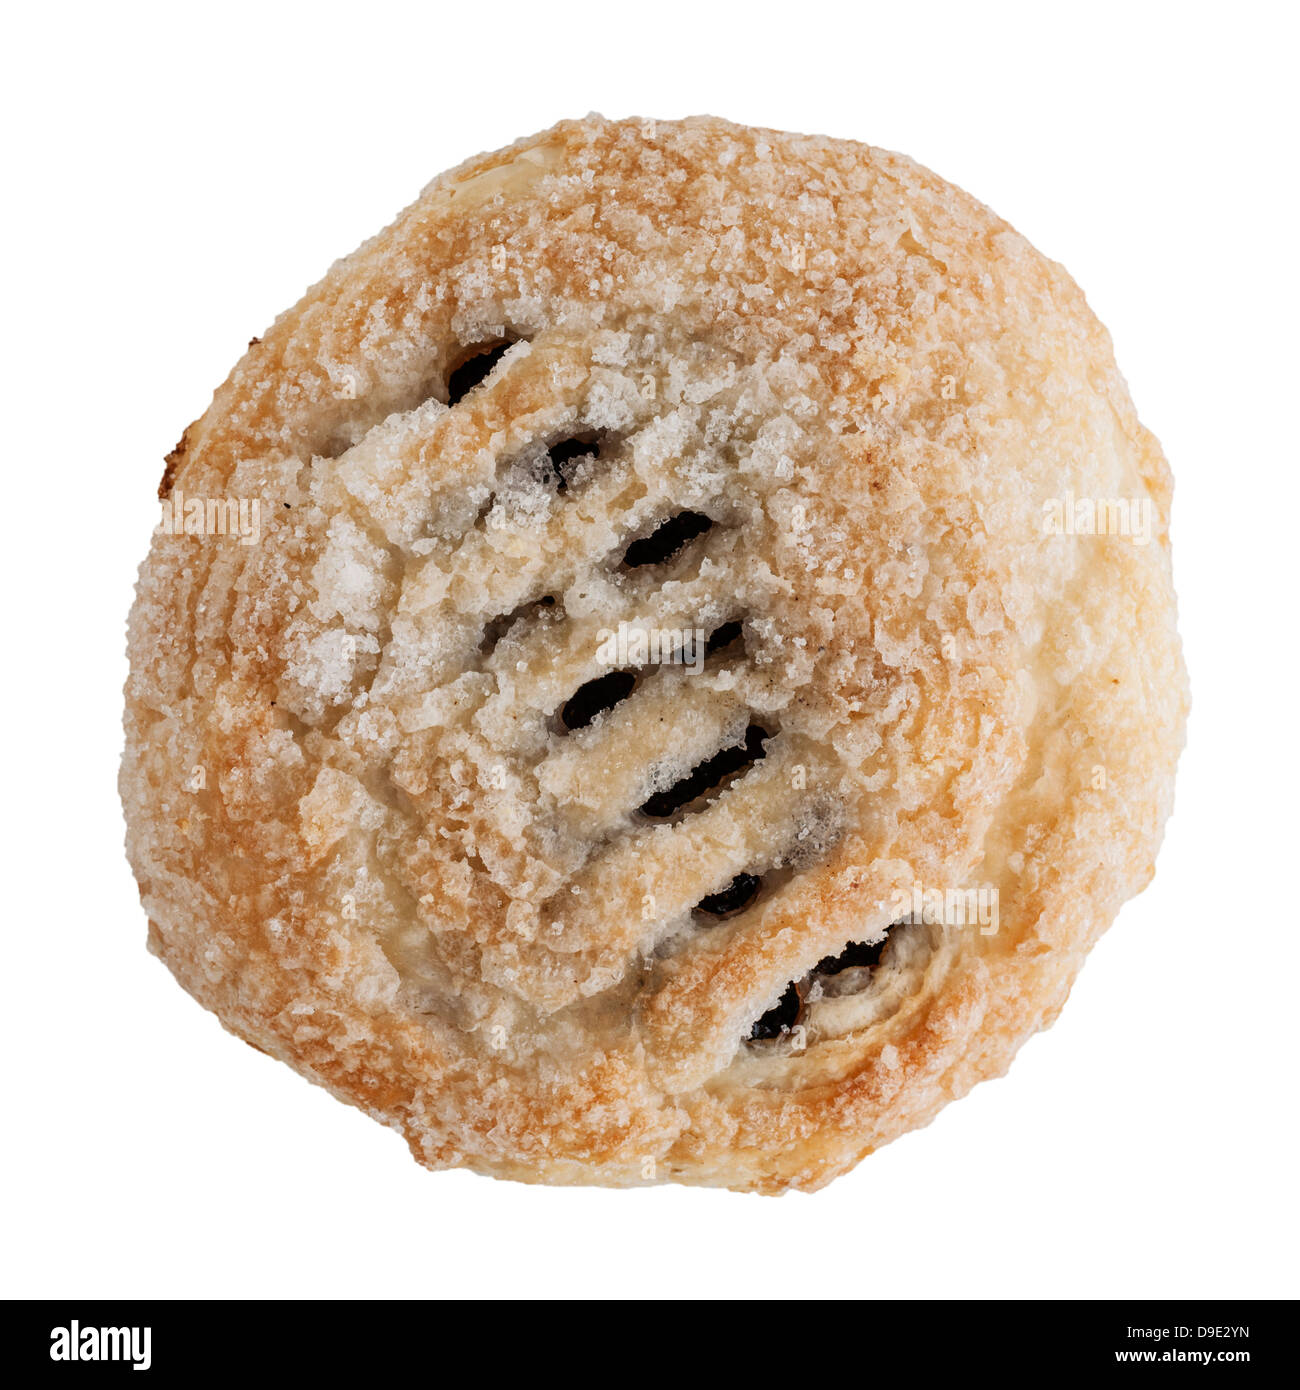 A home made Eccles Cake on a white background Stock Photo